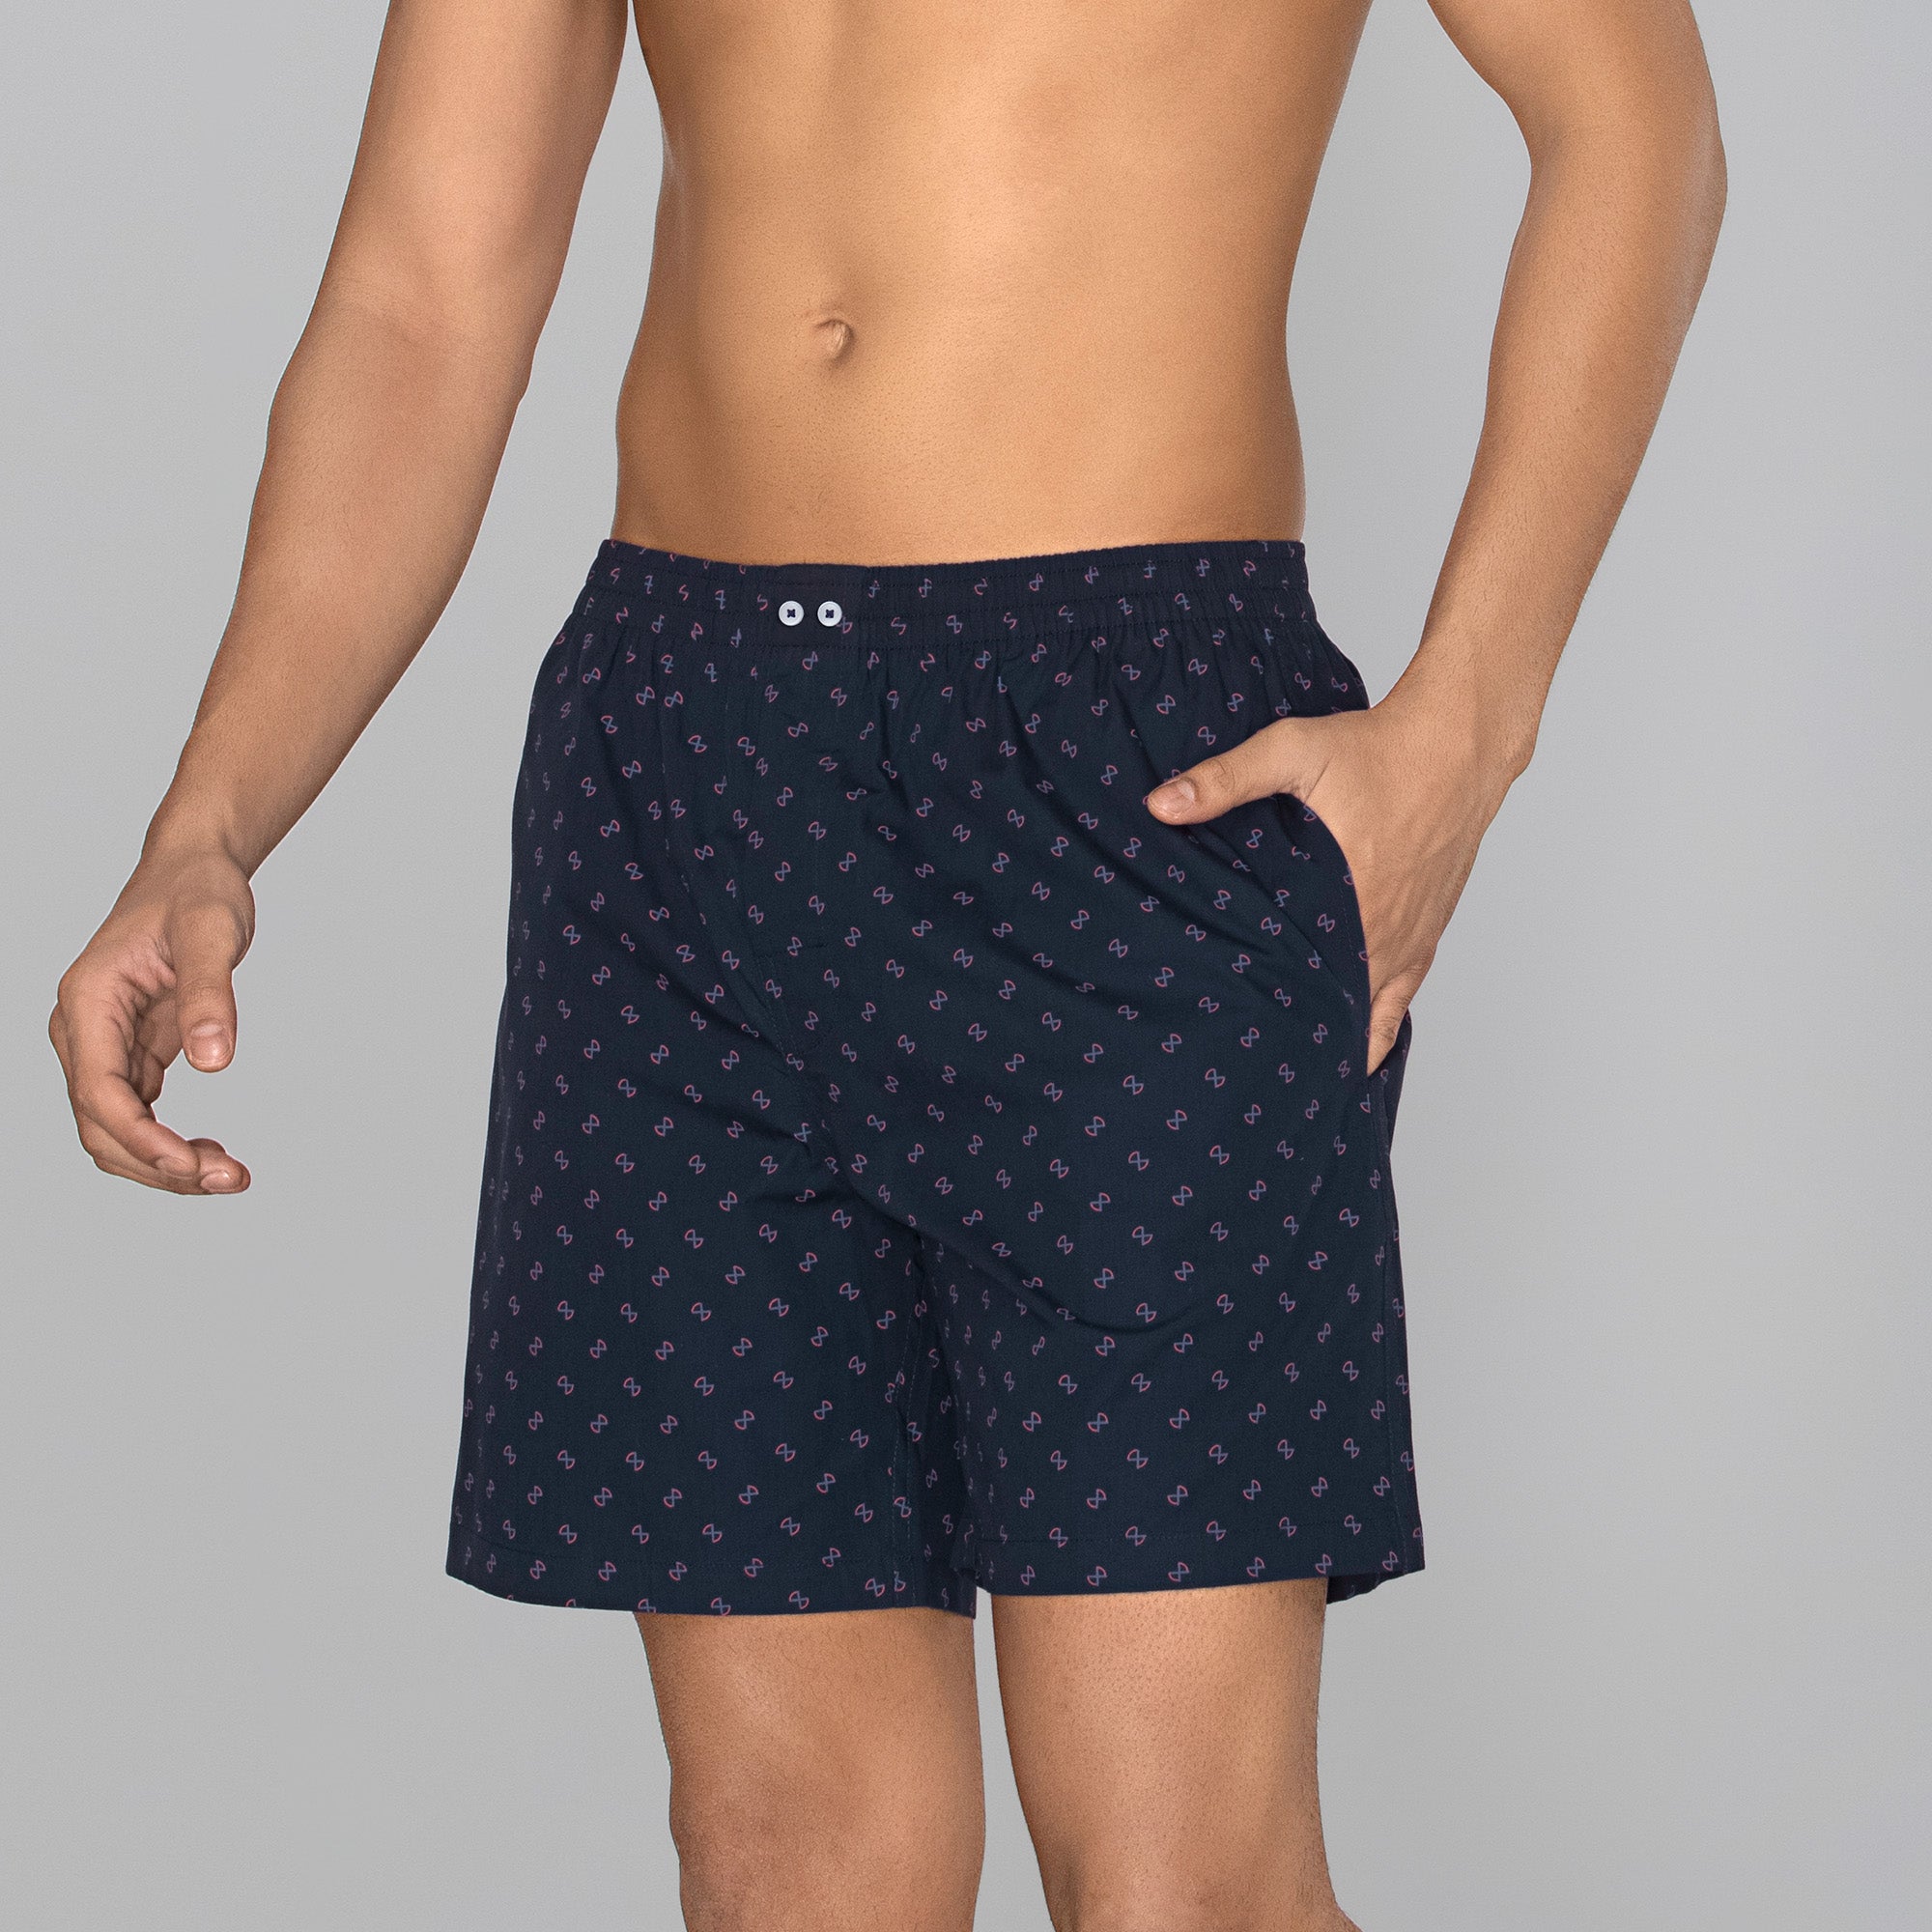 Astor Combed Cotton Boxer Shorts For Men Infinity Black - XYXX Mens Apparels